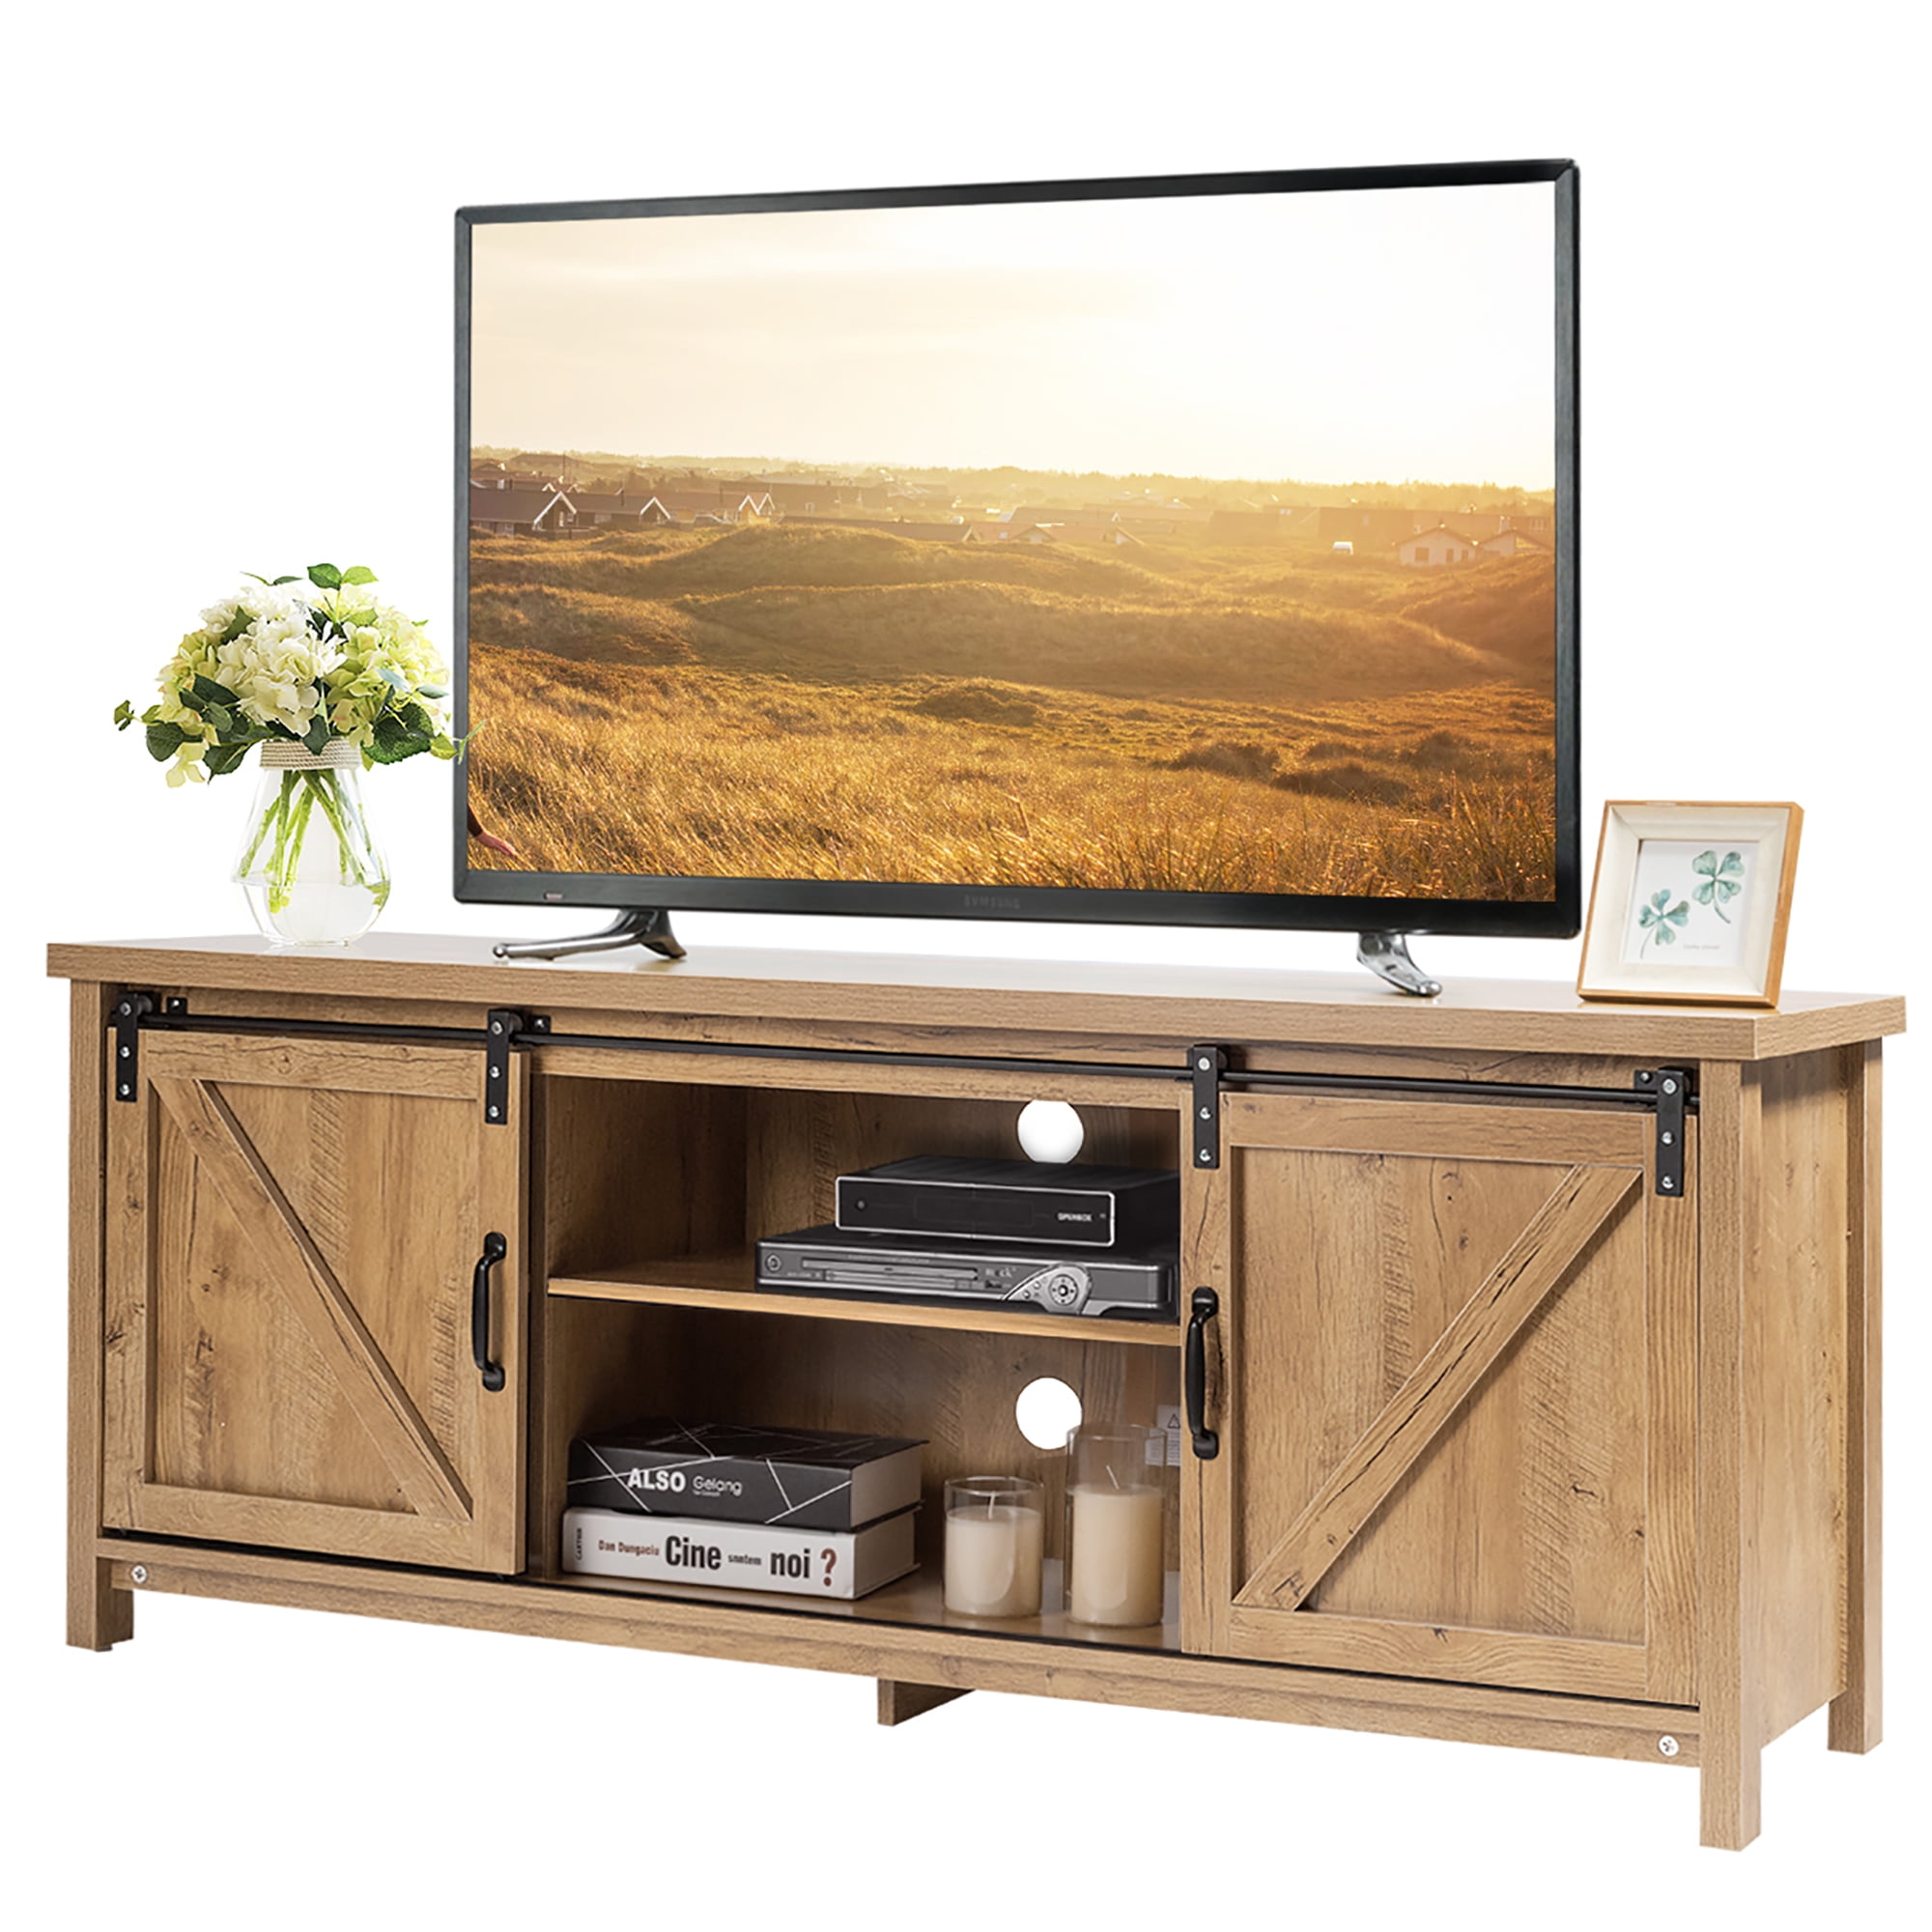 Rustic Wooden TV Stand Wood Furniture Media Cabinet Cream Coffee Console Tables